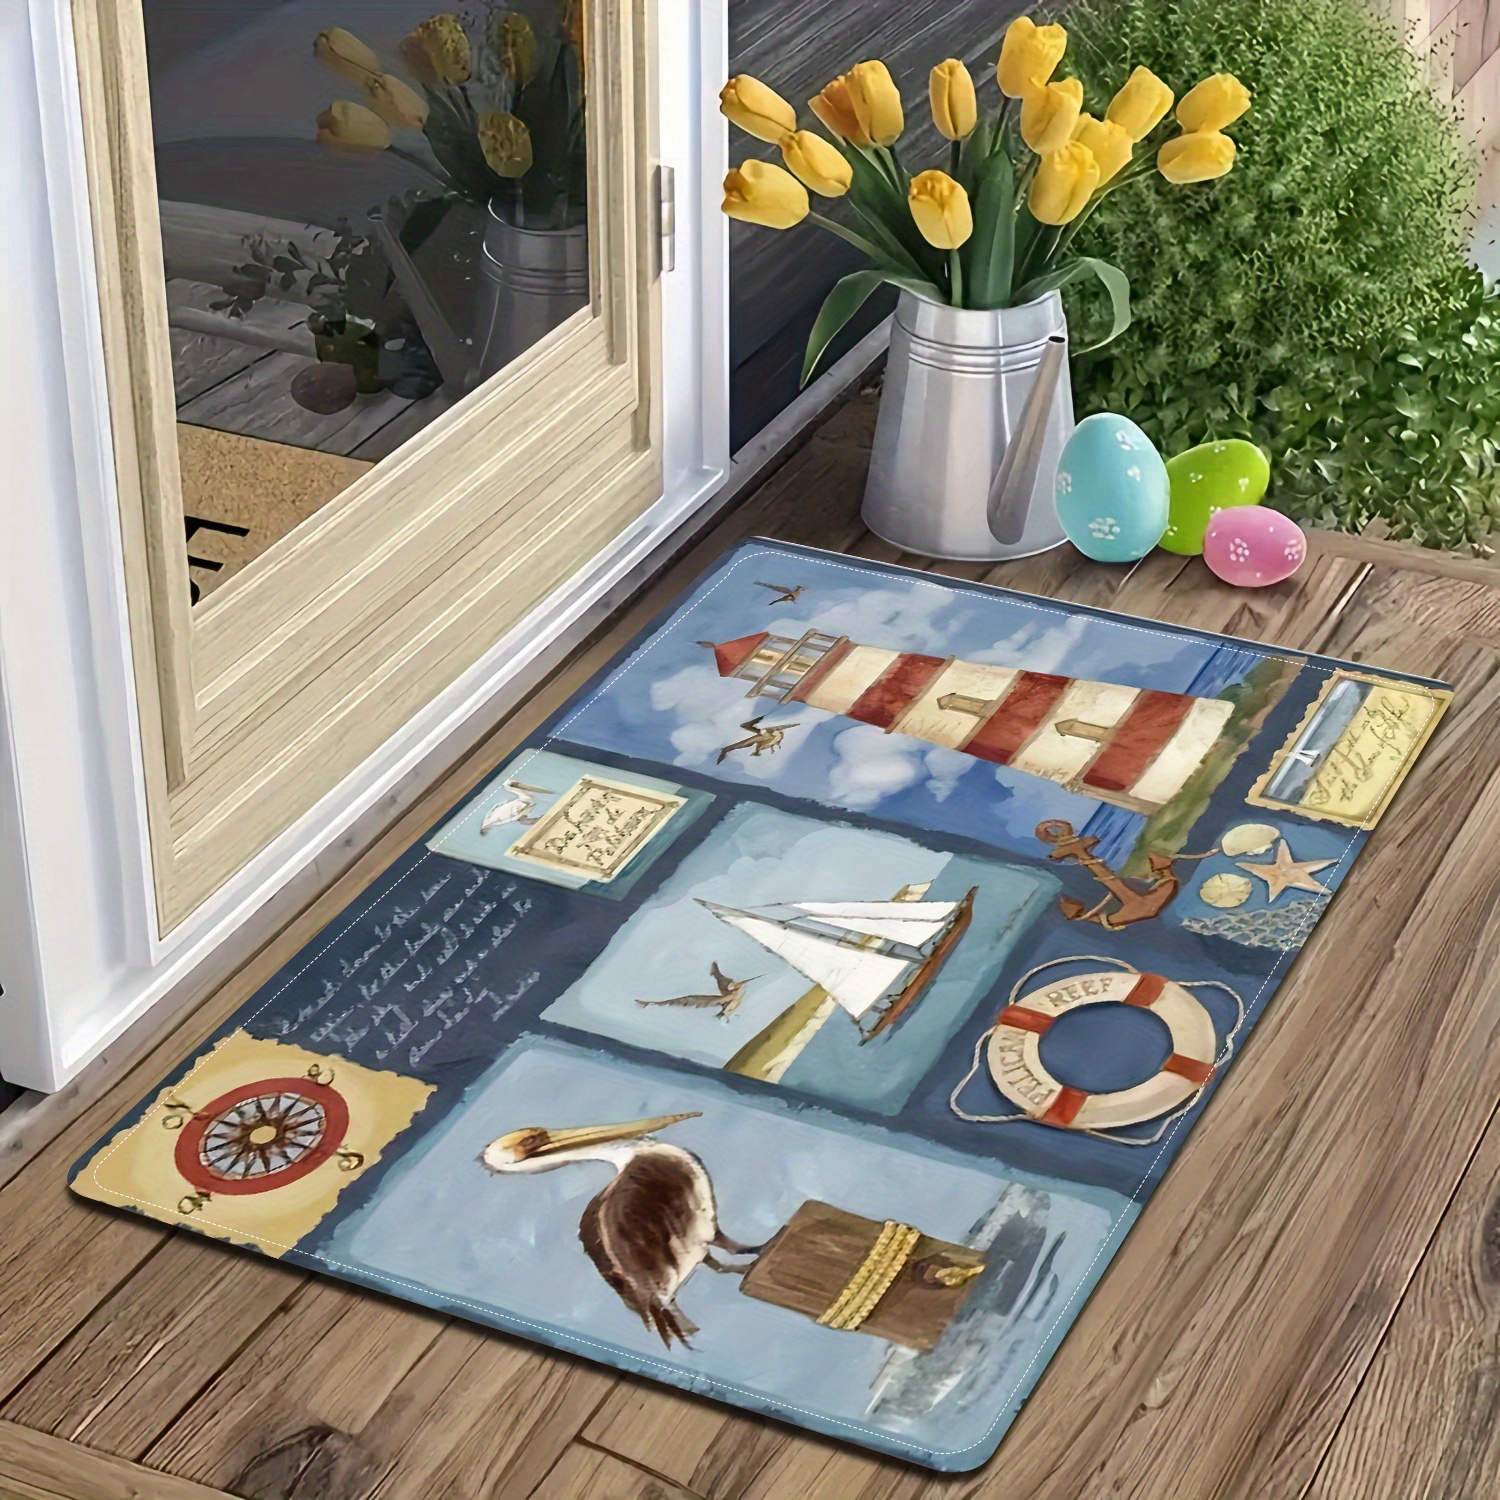 

Nautical-themed Outdoor Mat - Polyester, Quick-dry, Non-slip, Easy Clean, Stain-resistant Door Rug For Entrance, Patio, Kitchen - Decorative Coastal Design, Pelican And Sailboat Motifs, Hand Wash Only